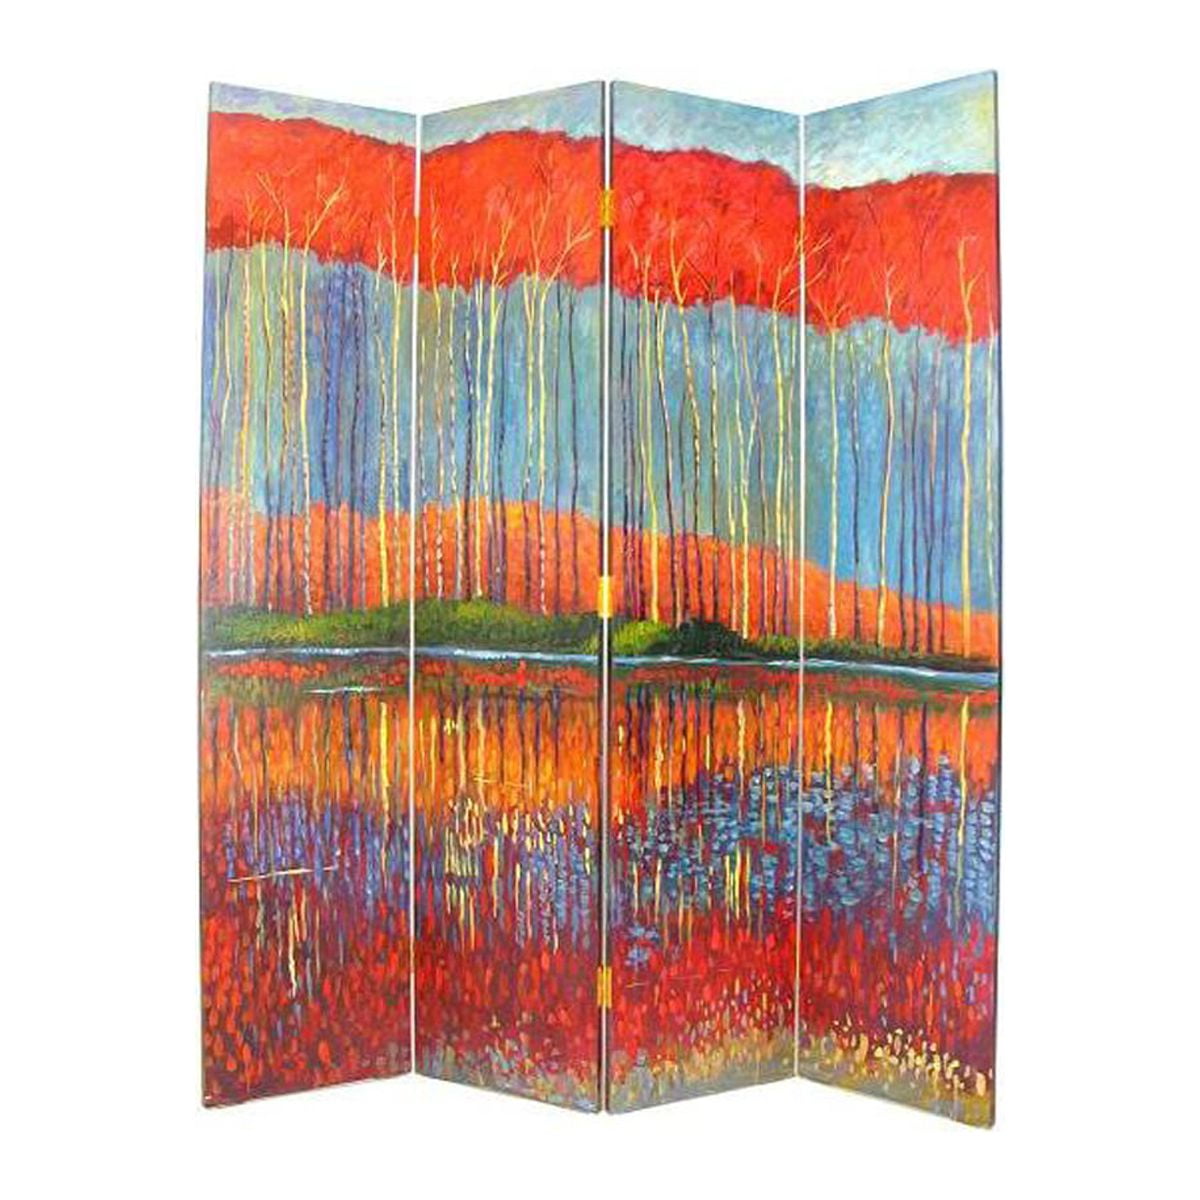 Bm213516 Wooden 4 Panel Room Divider With Forest Theme - Multi Color